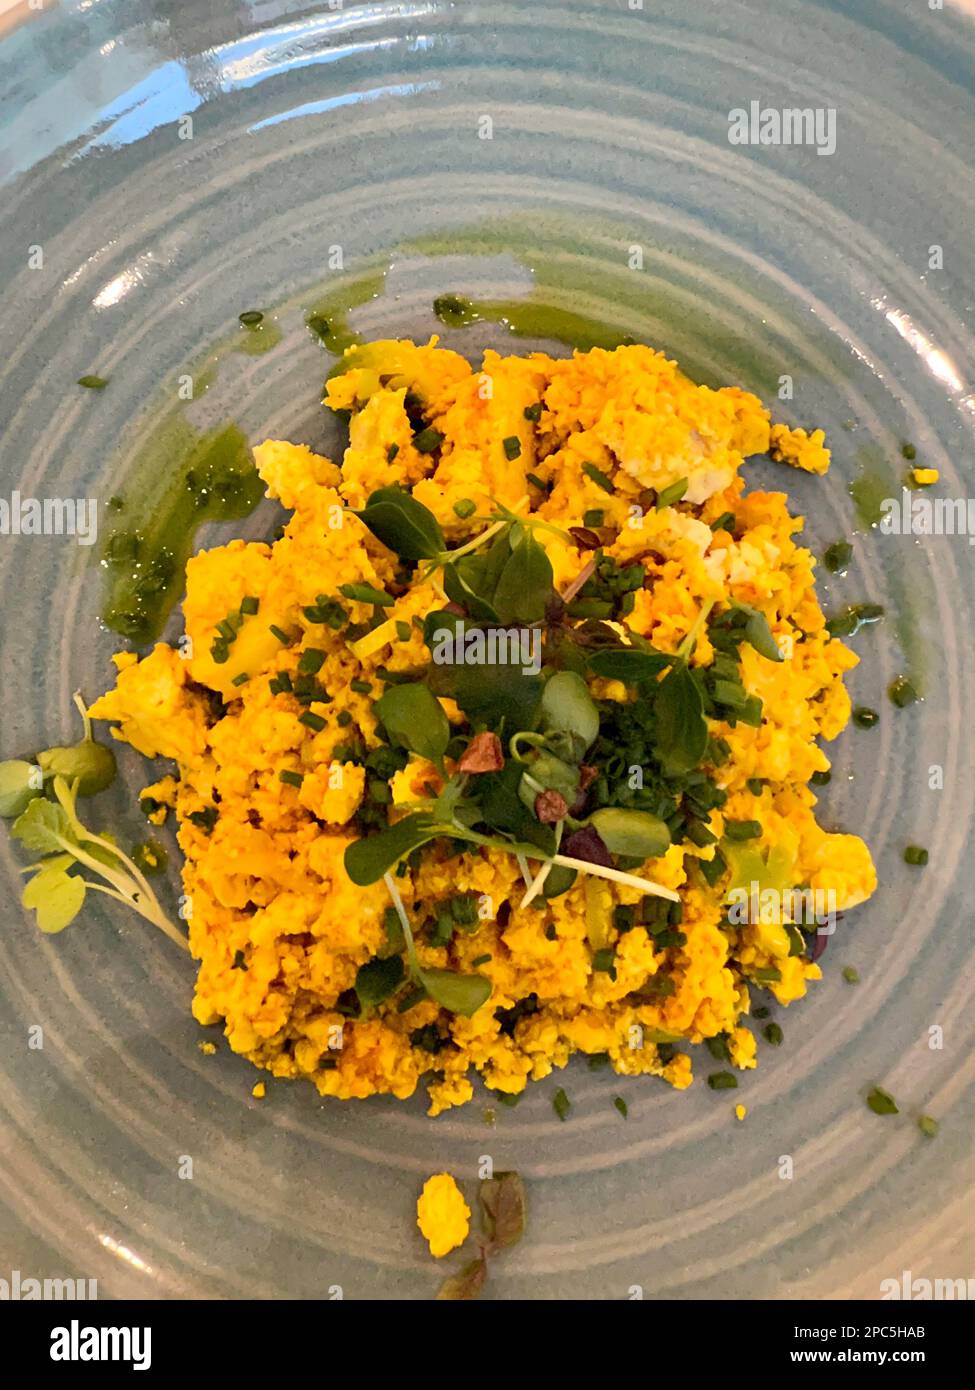 Tofu scramble with micro herbs on a translucent plate, taken from above and in a restaurant. Stock Photo